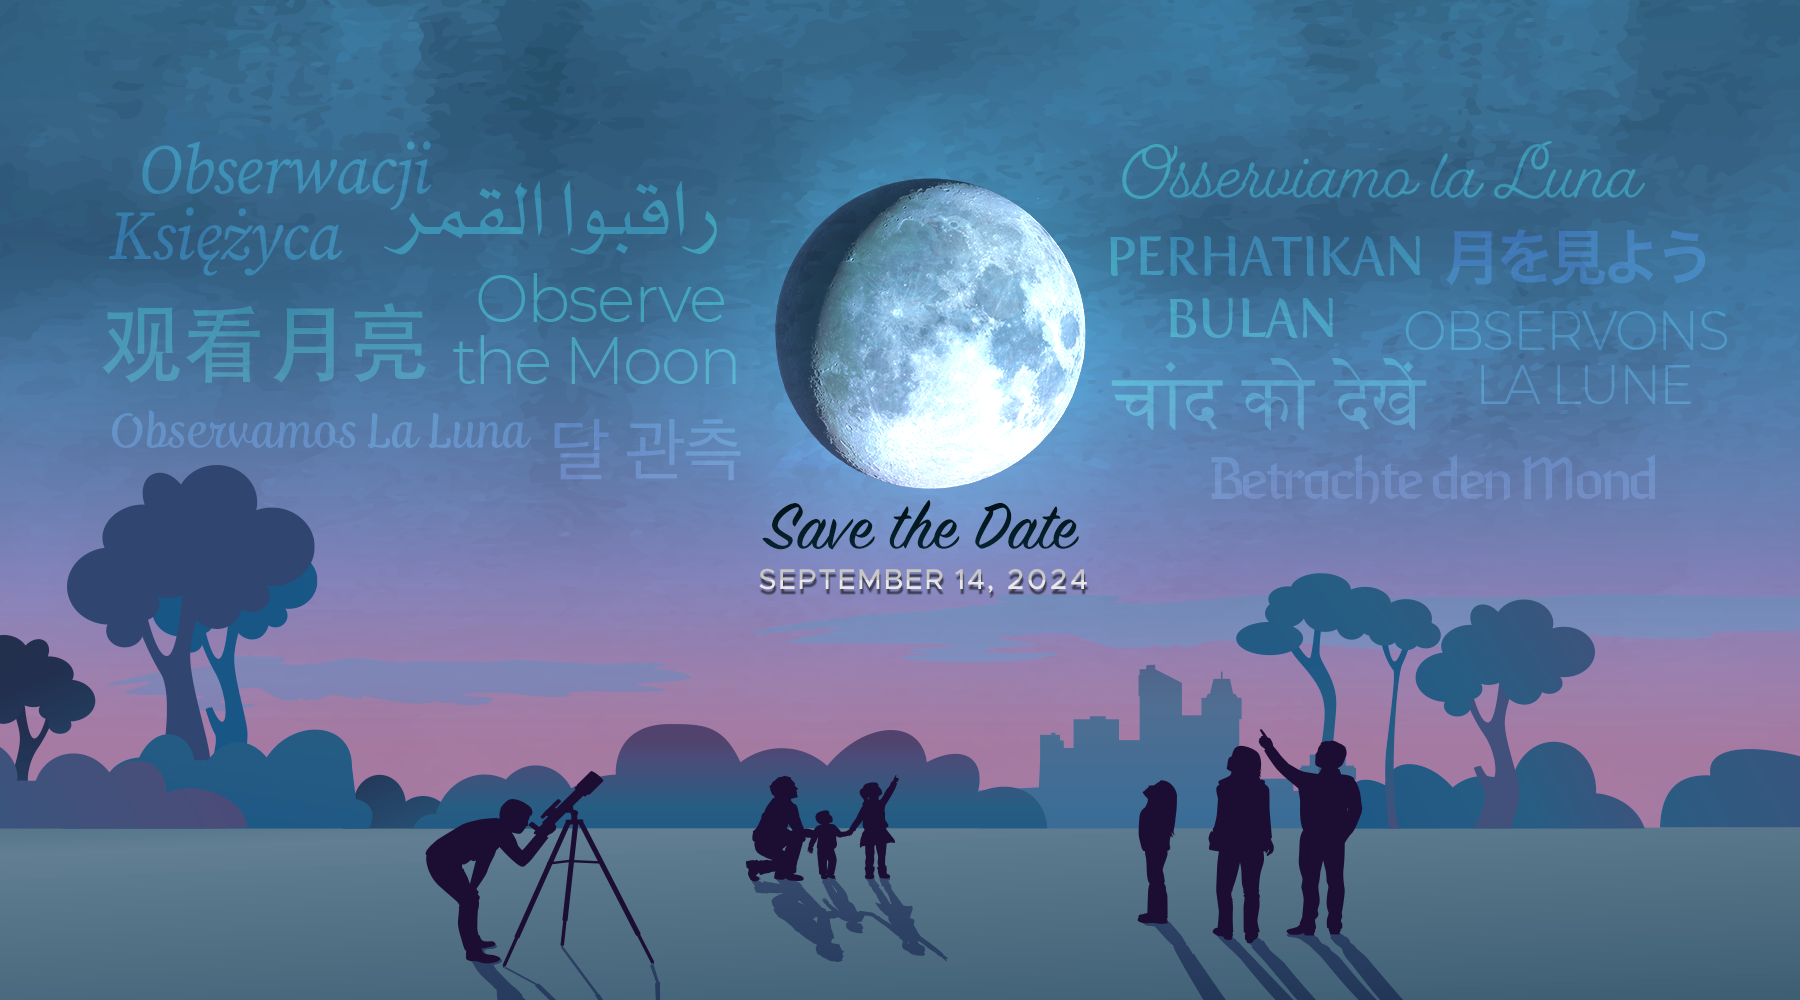 slide 1 - Save the Date card for International Observe the Moon Night on September 14, 2024